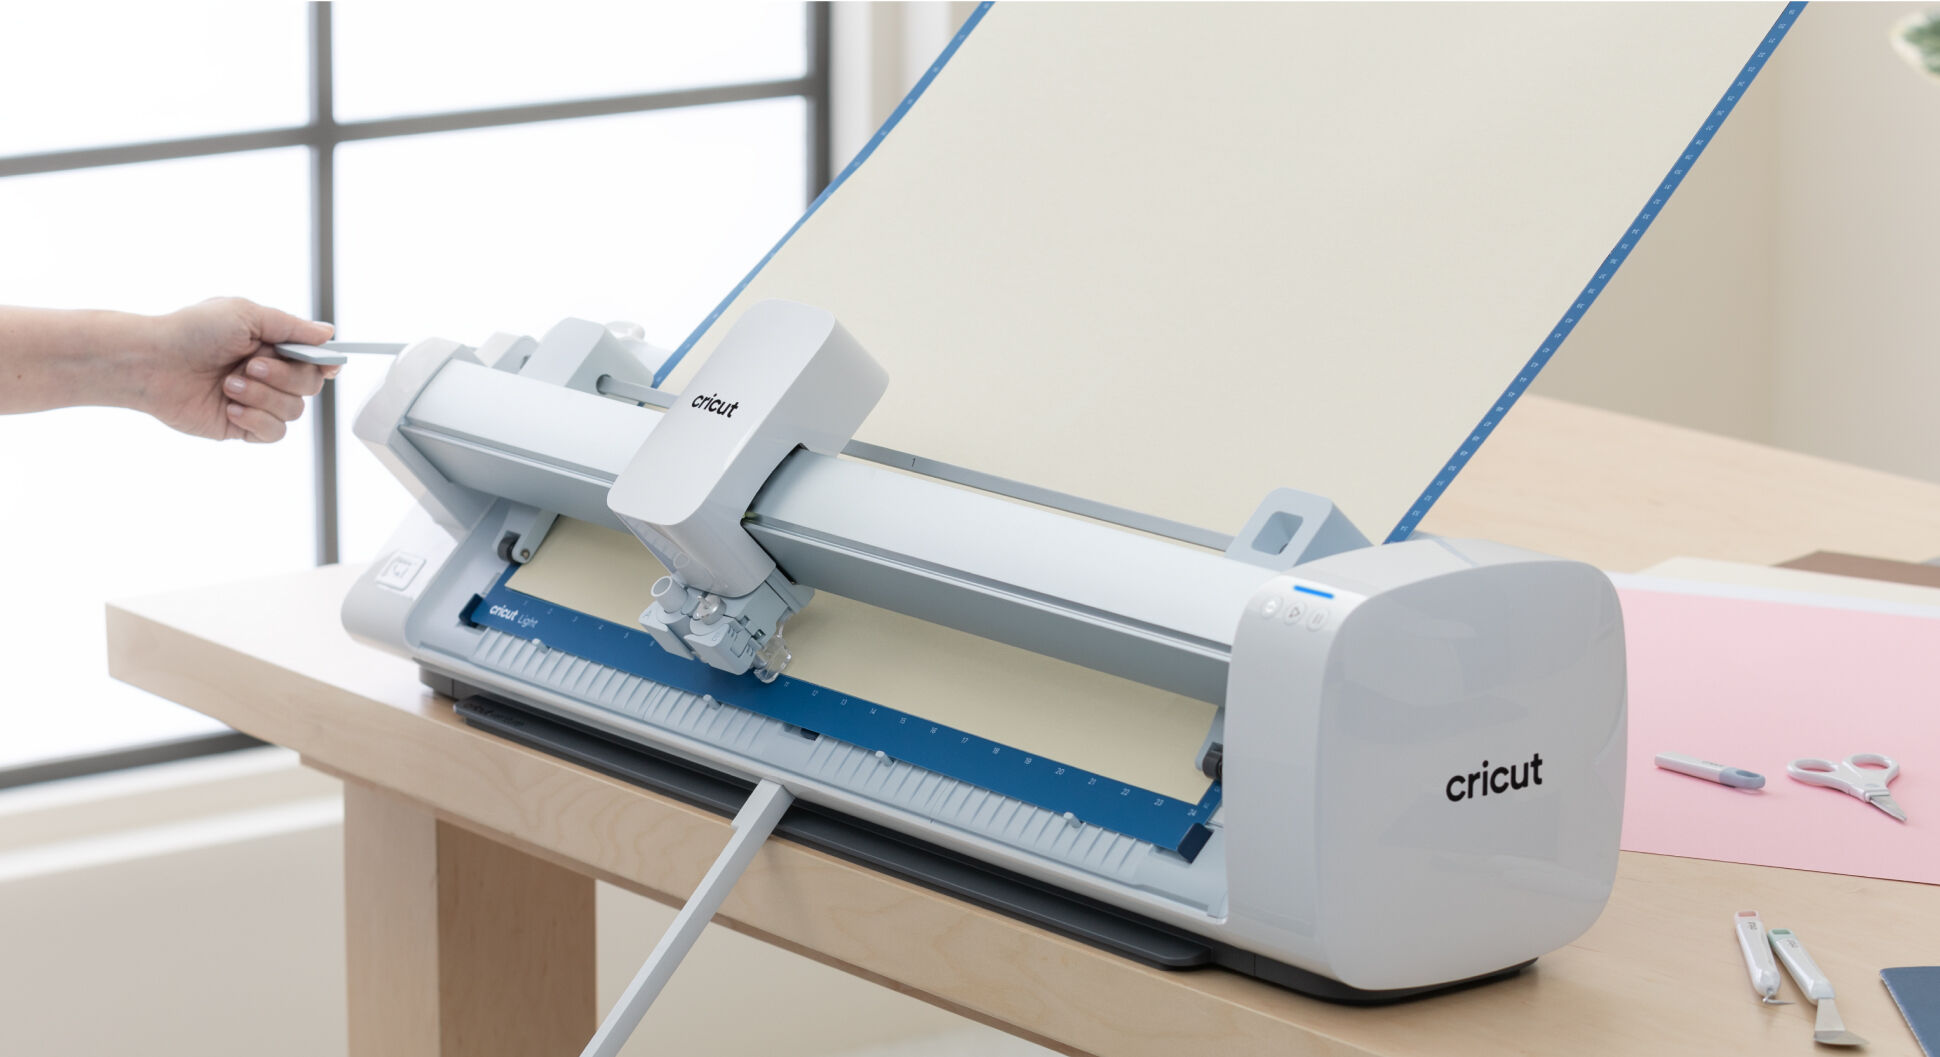  Cricut Venture  Wide-Format Smart Cutting Machine (25 inch),  Precision cuts up to 100+ Materials at Commercial speeds